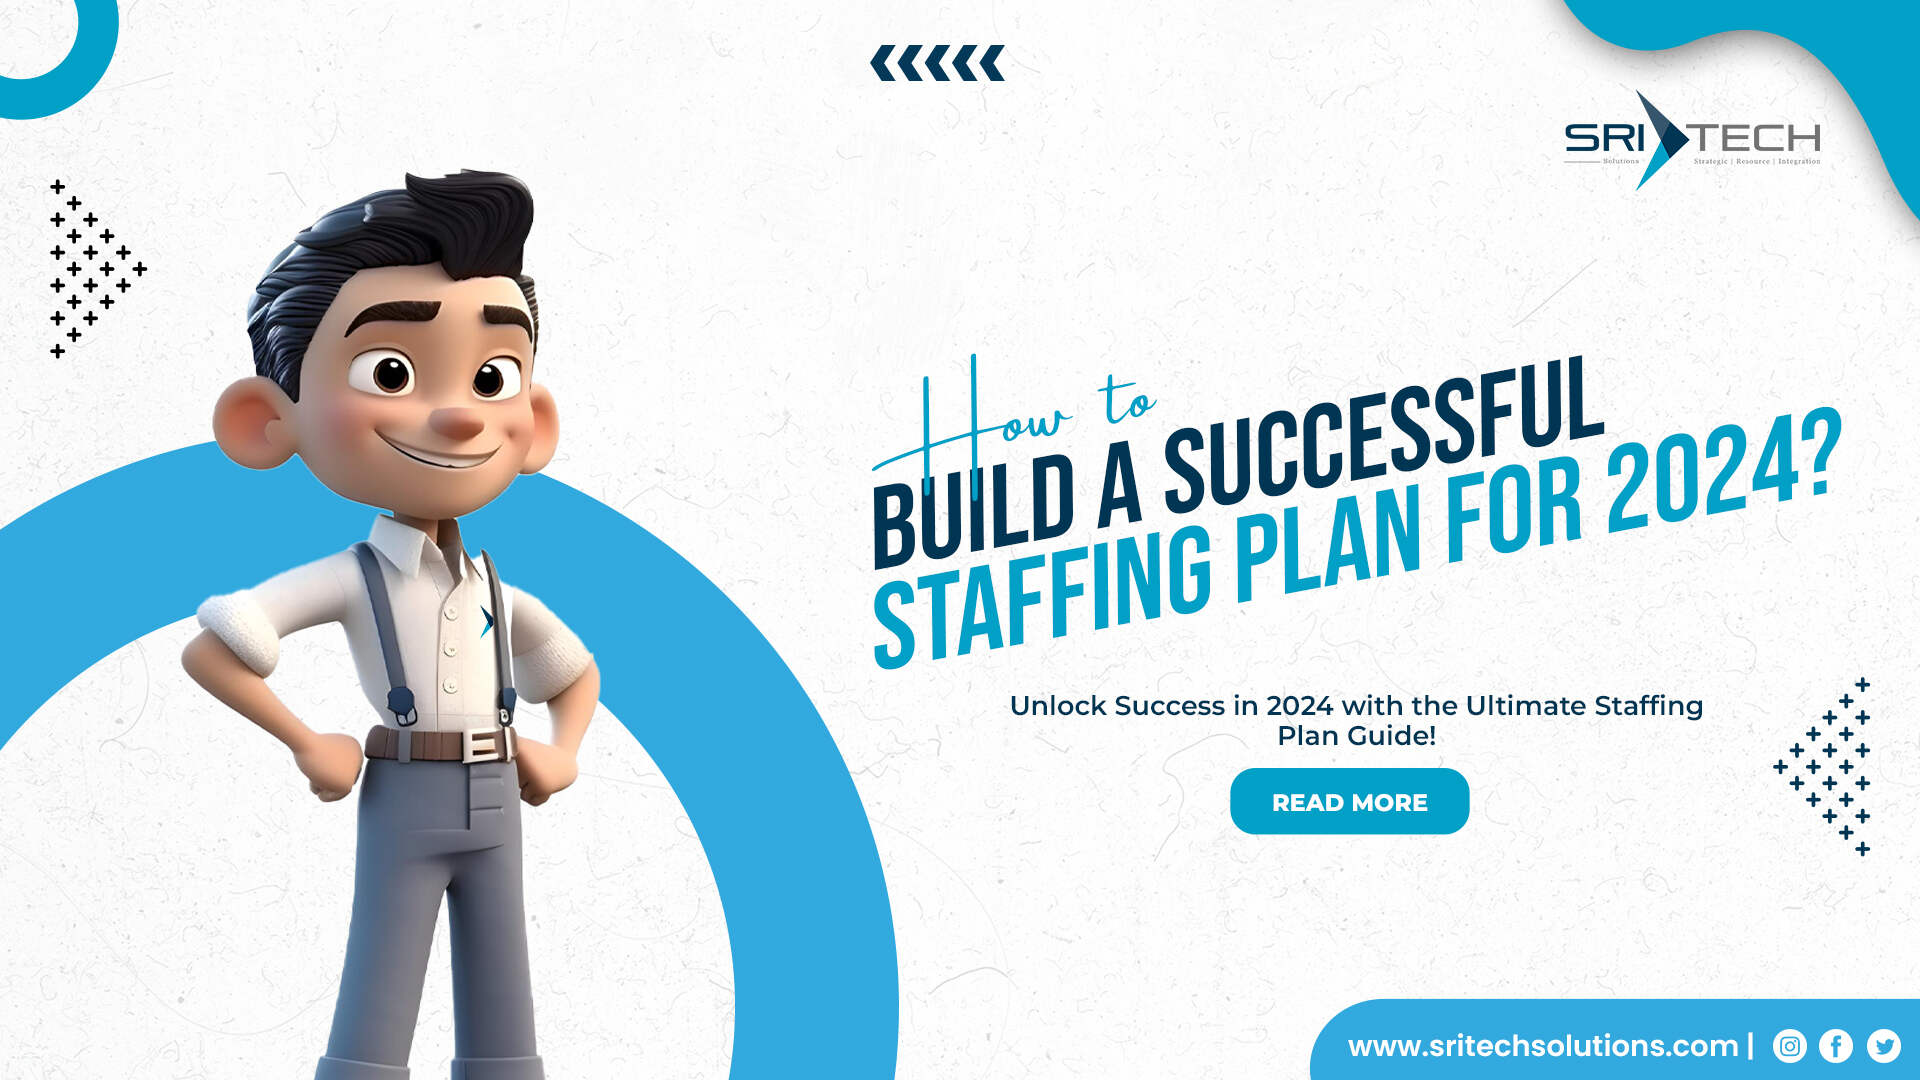 How to Build a Successful Staffing Plan for 2024?